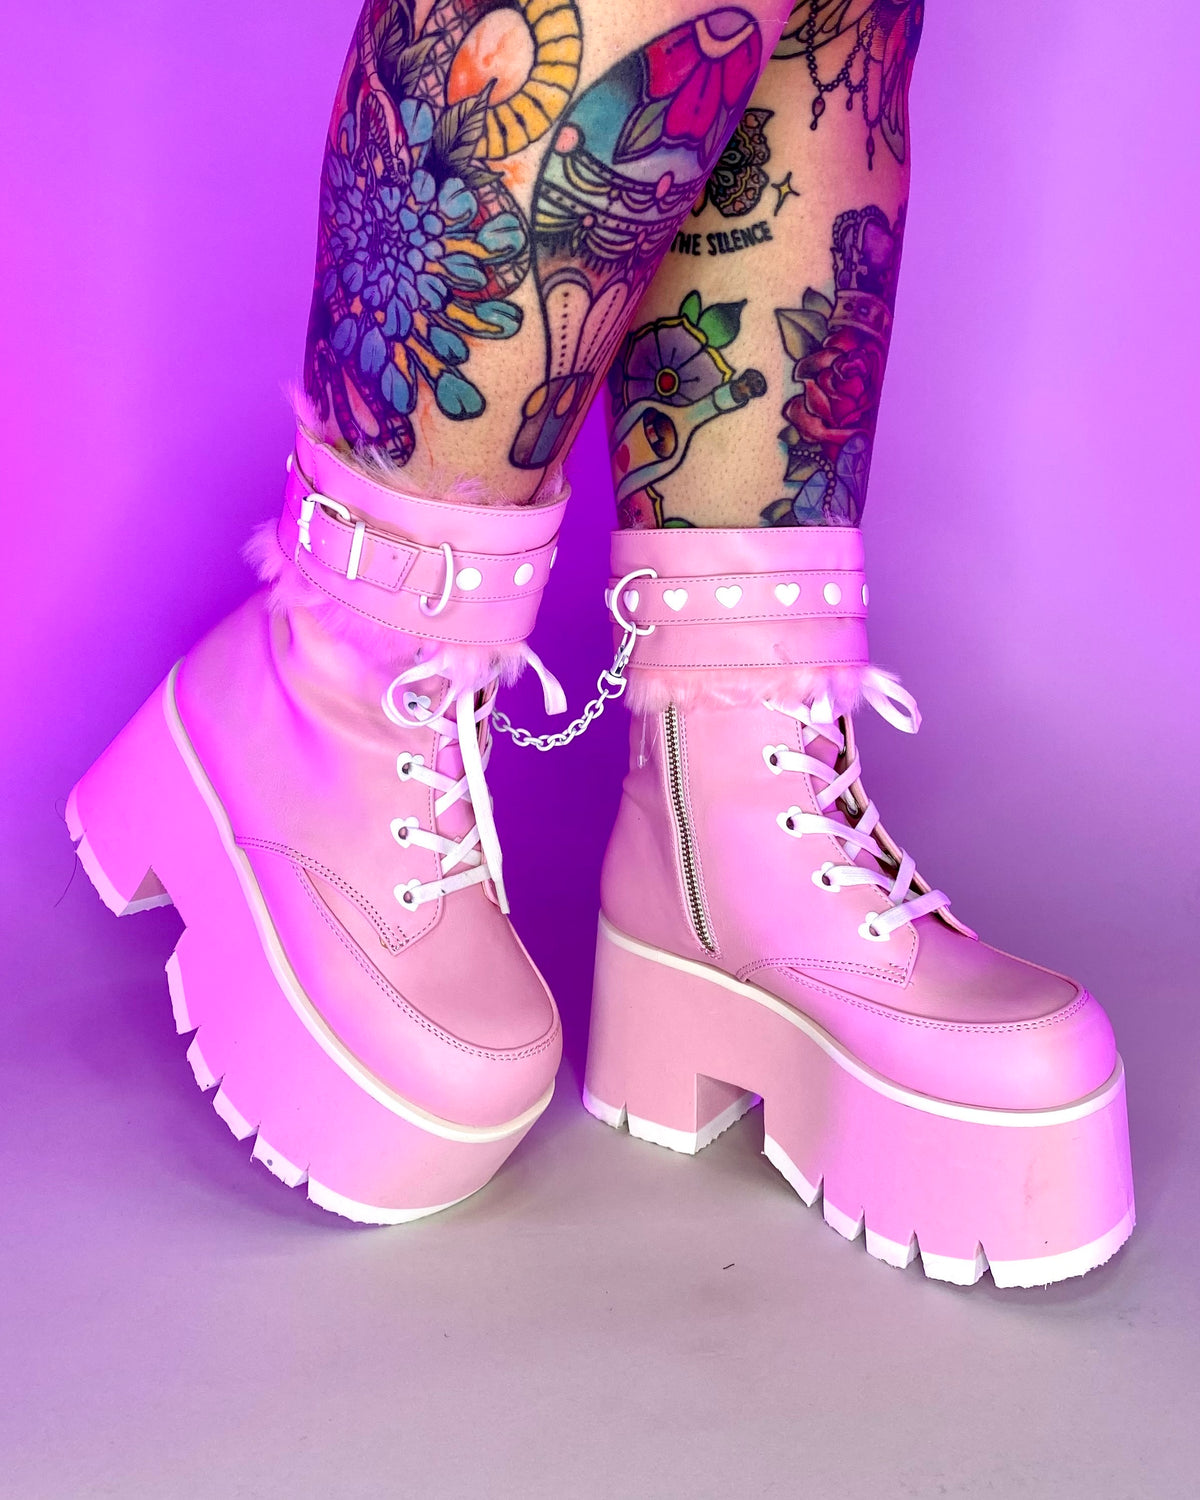 Demonia Ashes Baby Pink Fuzzy Cuff Boots